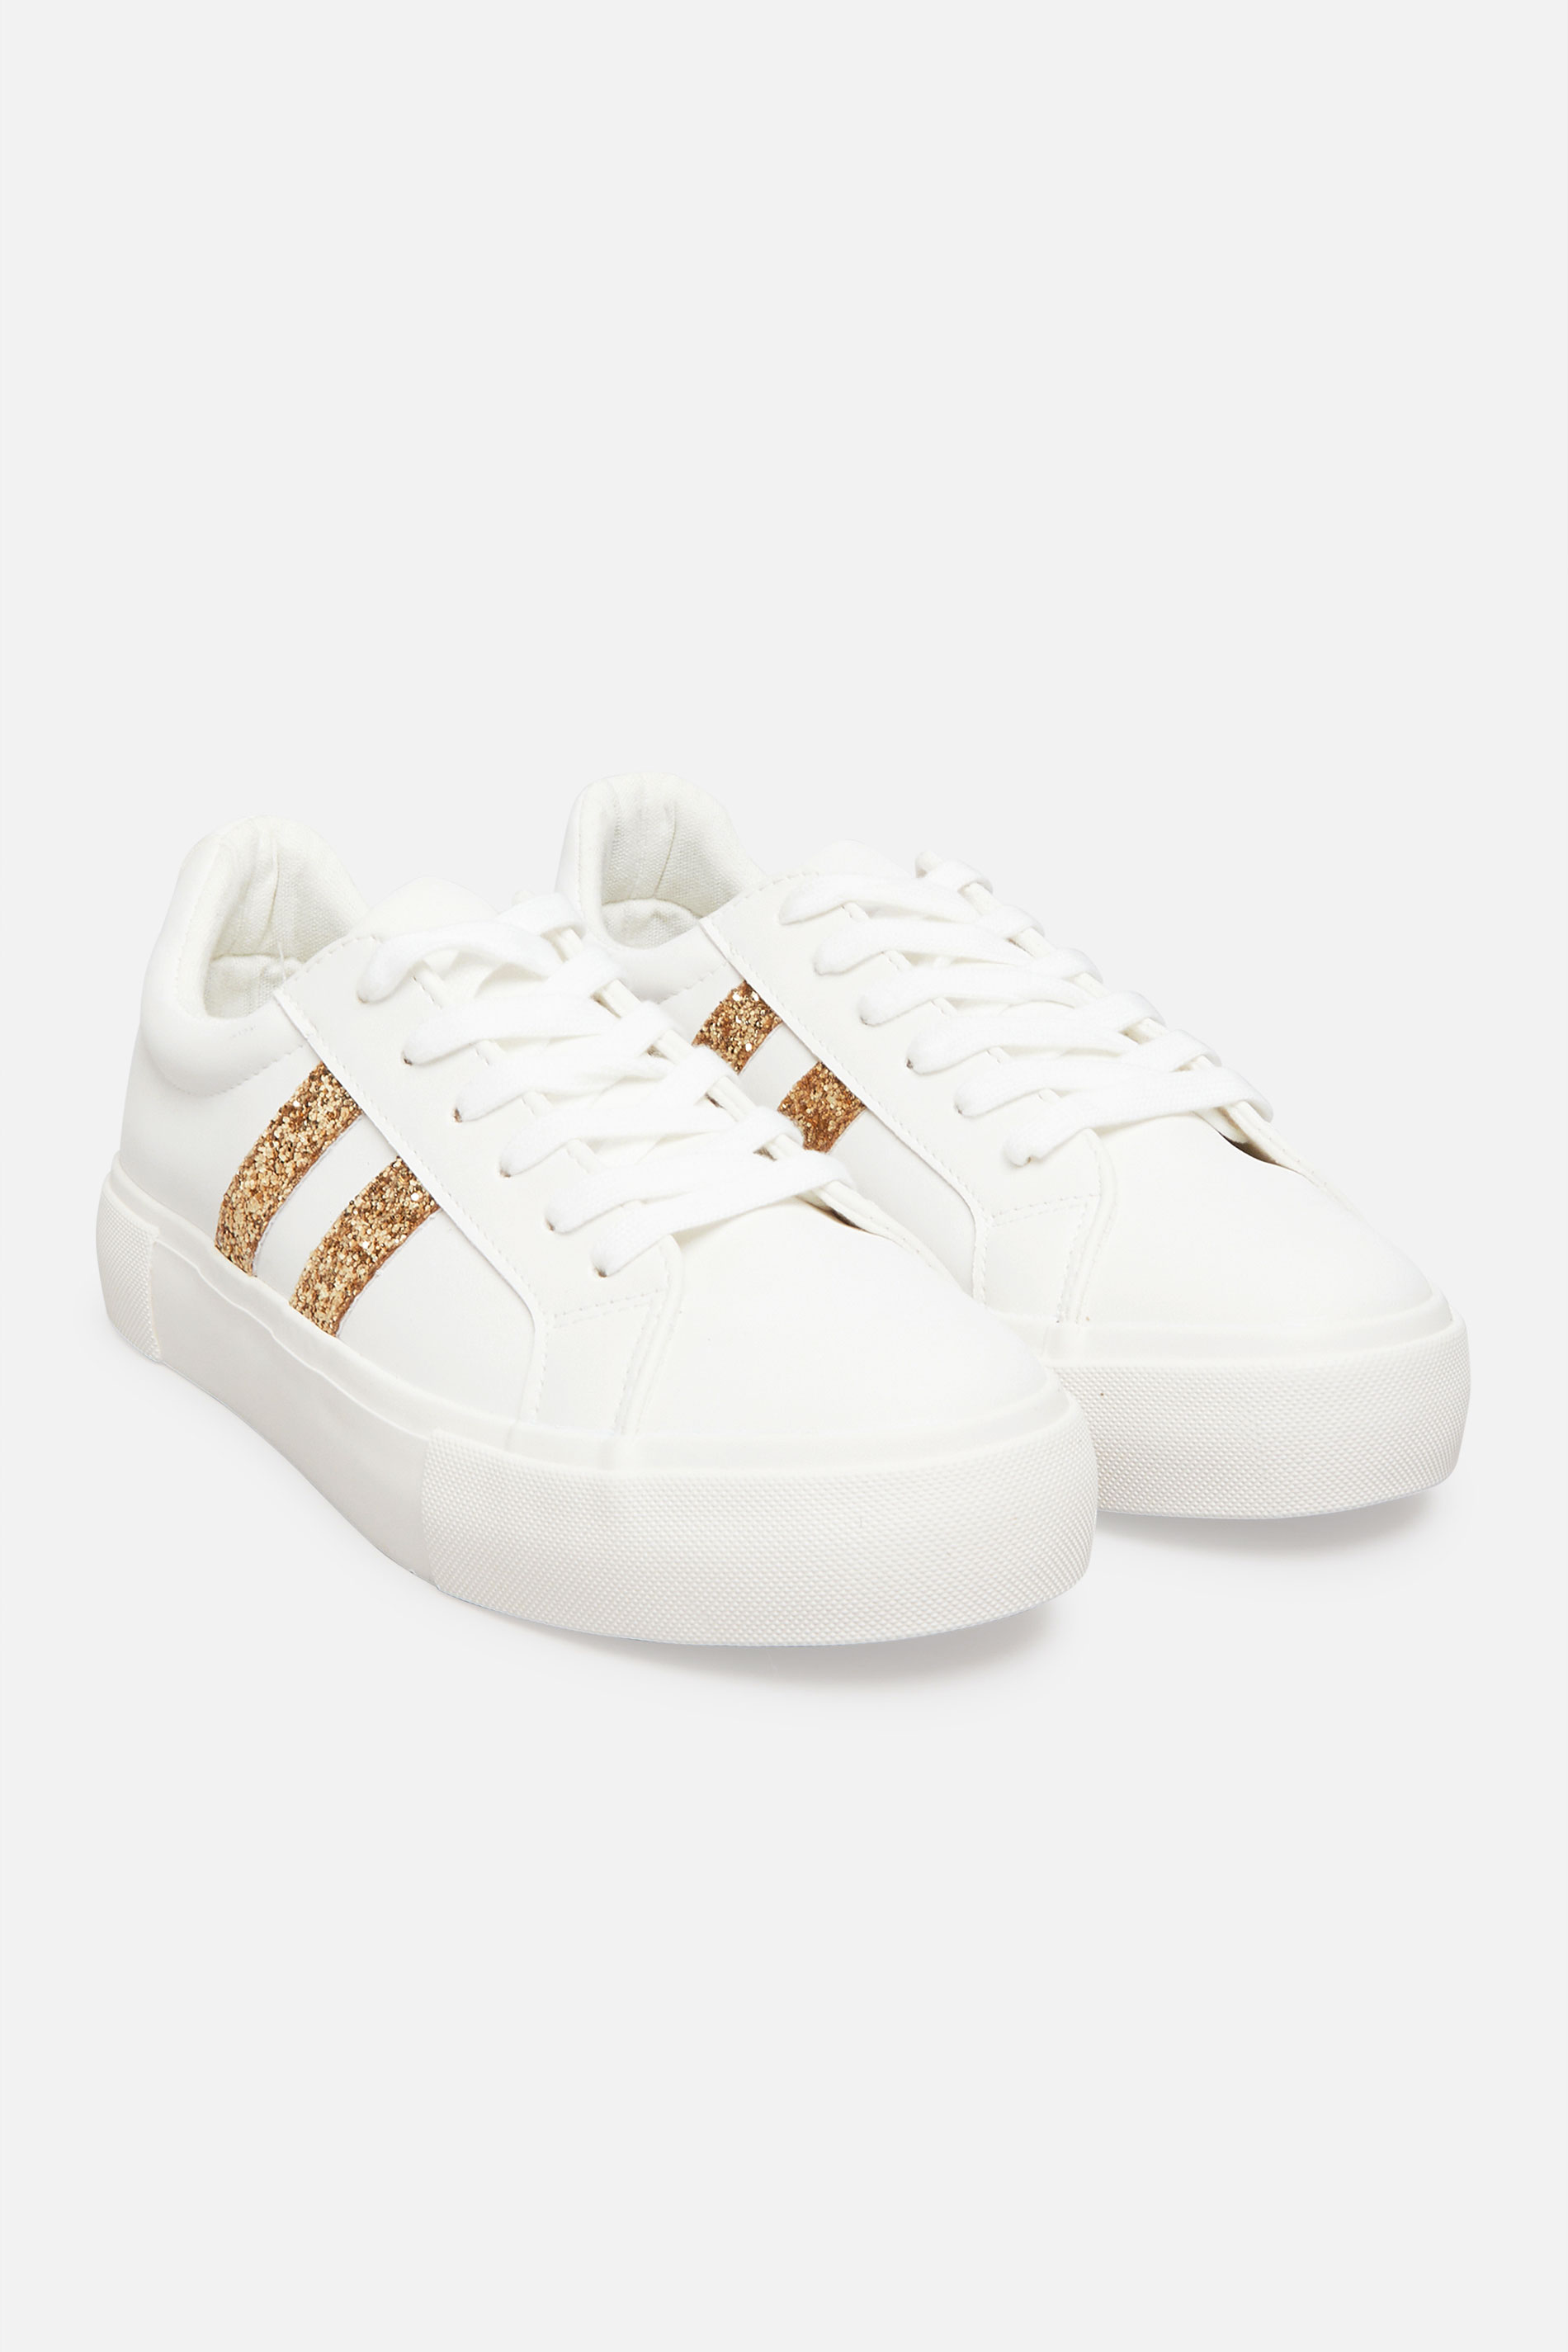 LIMITED COLLECTION White & Gold Stripe Flatform Trainers in Regular Fit_AR.jpg